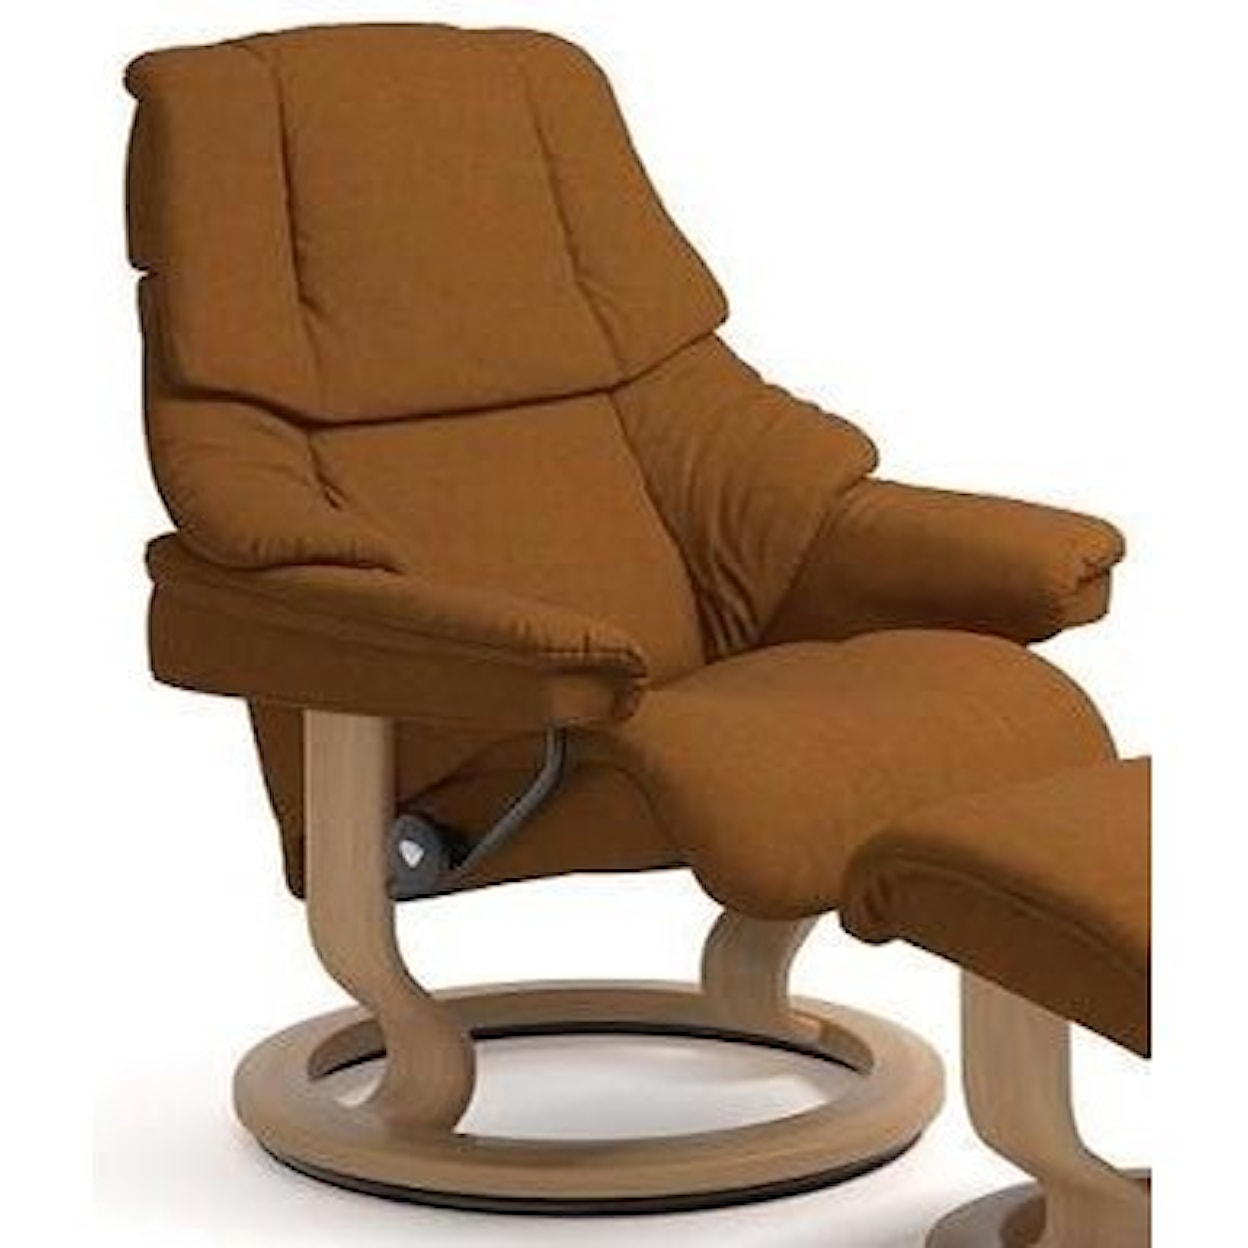 Stressless by Ekornes Reno Small Reclining Chair with Classic Base